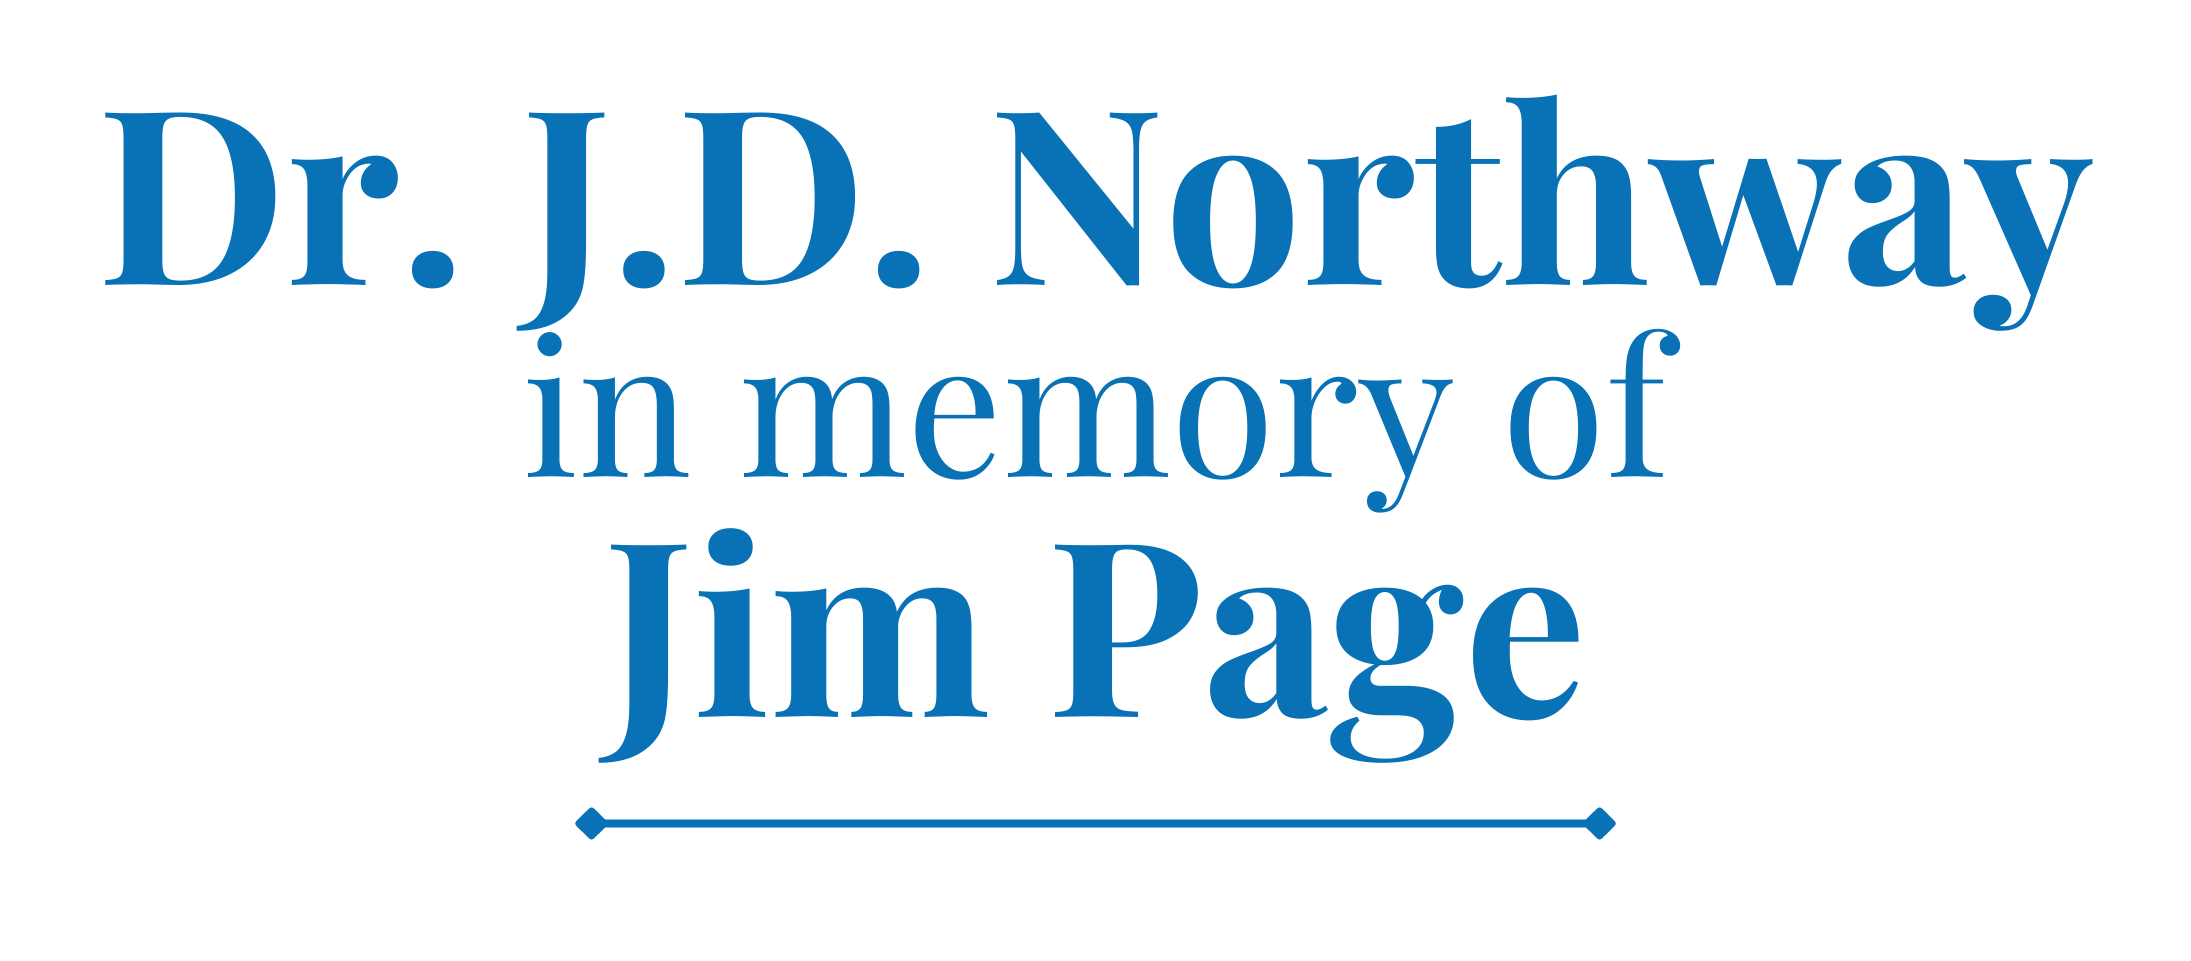 Dr. J.D. Northway in memory of Jim Page